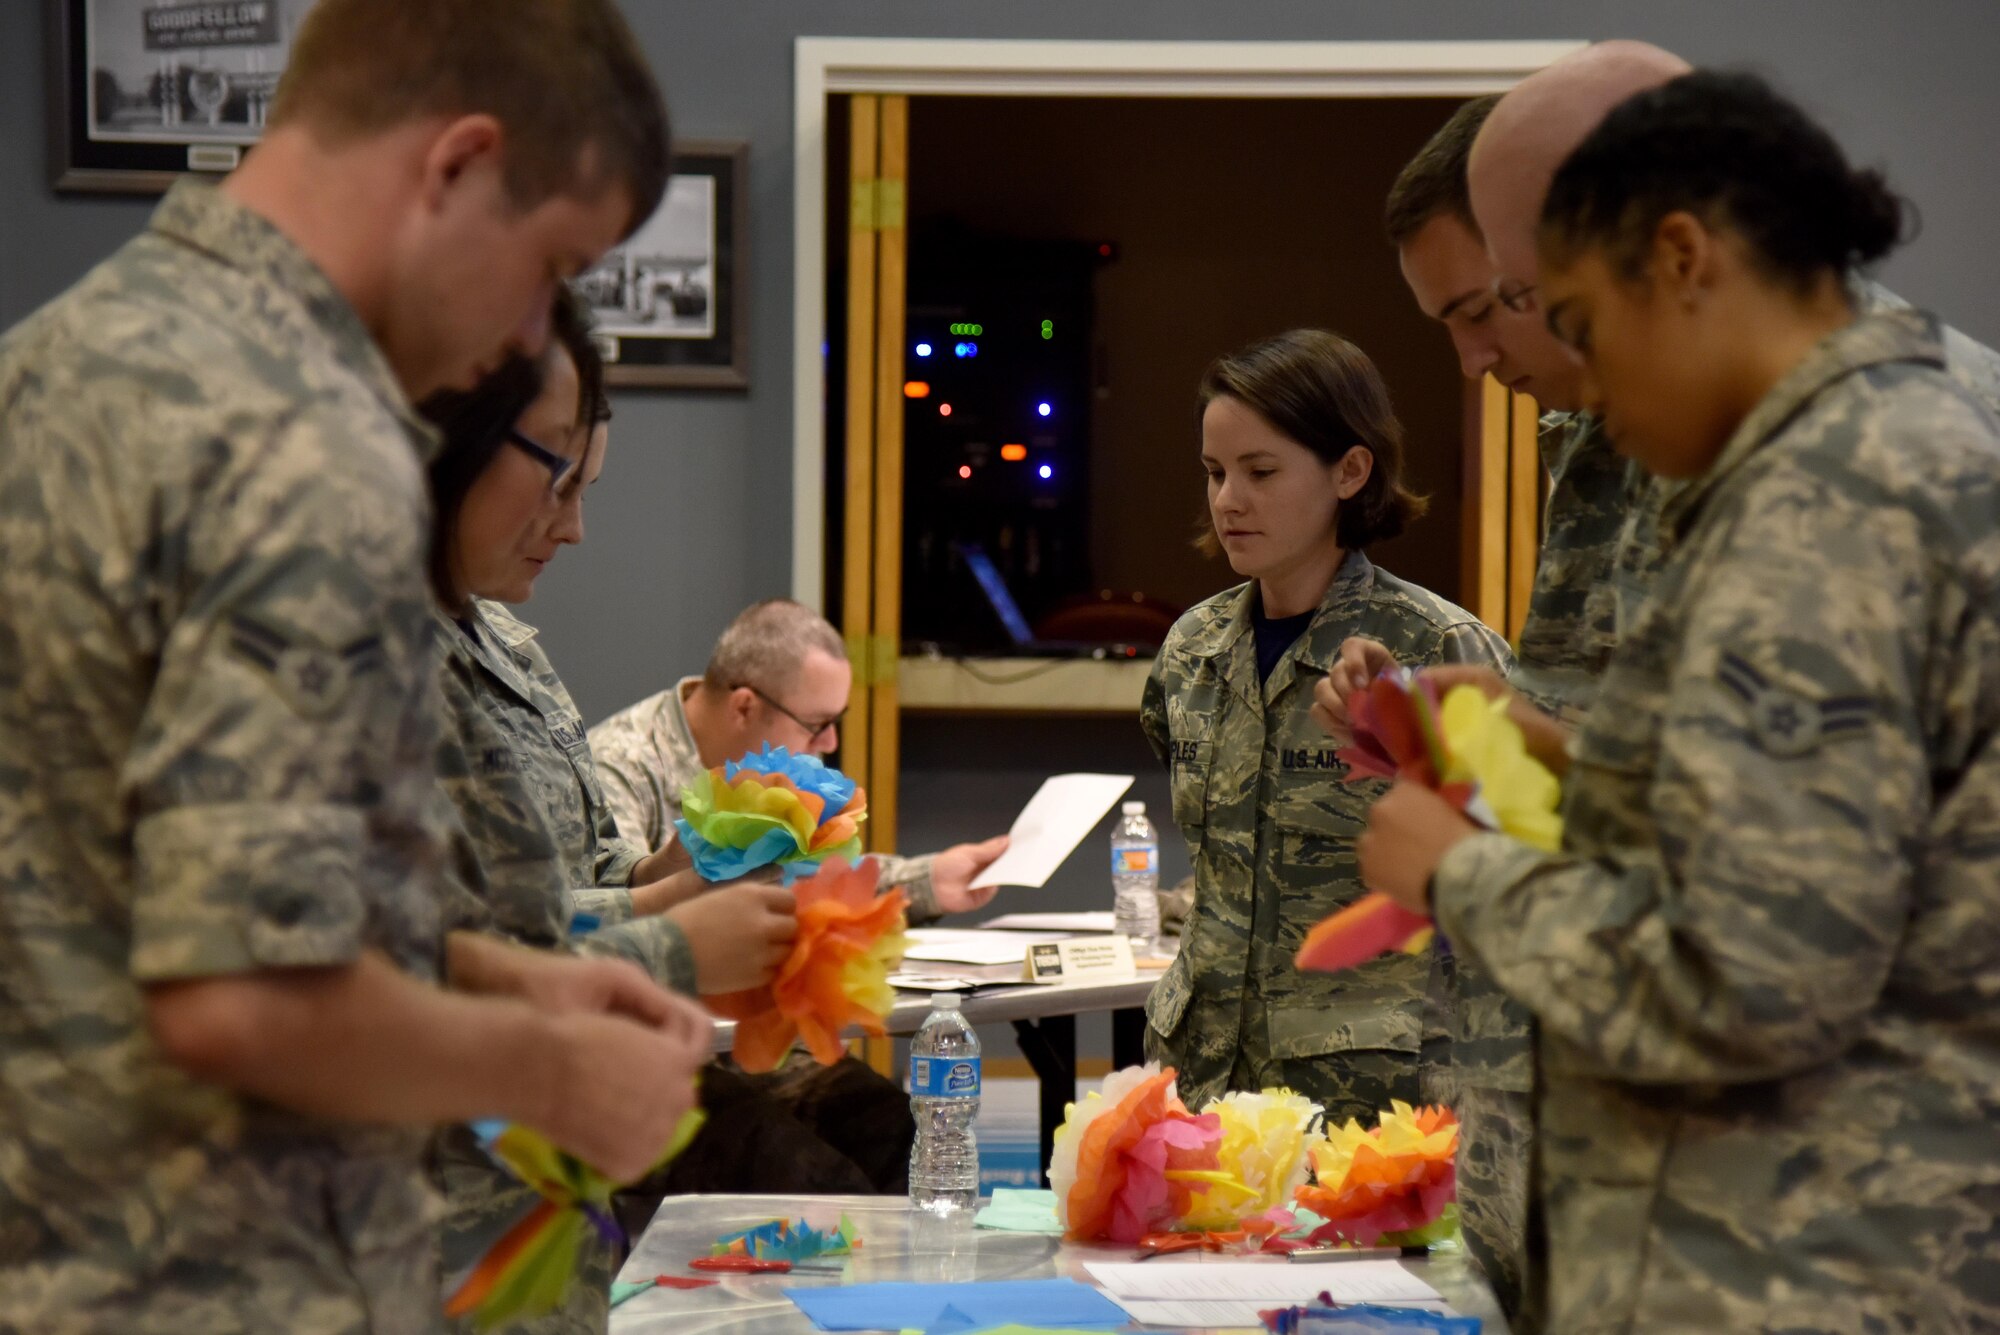 U.S. Air Force Tech. Sgt. Cheyanne Samples, 315th Training Squadron instructor, watches Airmen make paper flowers for the Top Tech competition at the Event Center on Goodfellow Air Force Base, Texas, May 5, 2017. Samples taught the Airmen the skills needed to make flowers without assistance. During the competition, instructors had to teach a subject and audience members had to demonstrate their understanding of the topic. (U.S. Air Force photo by Staff Sgt. Joshua Edwards/Released)